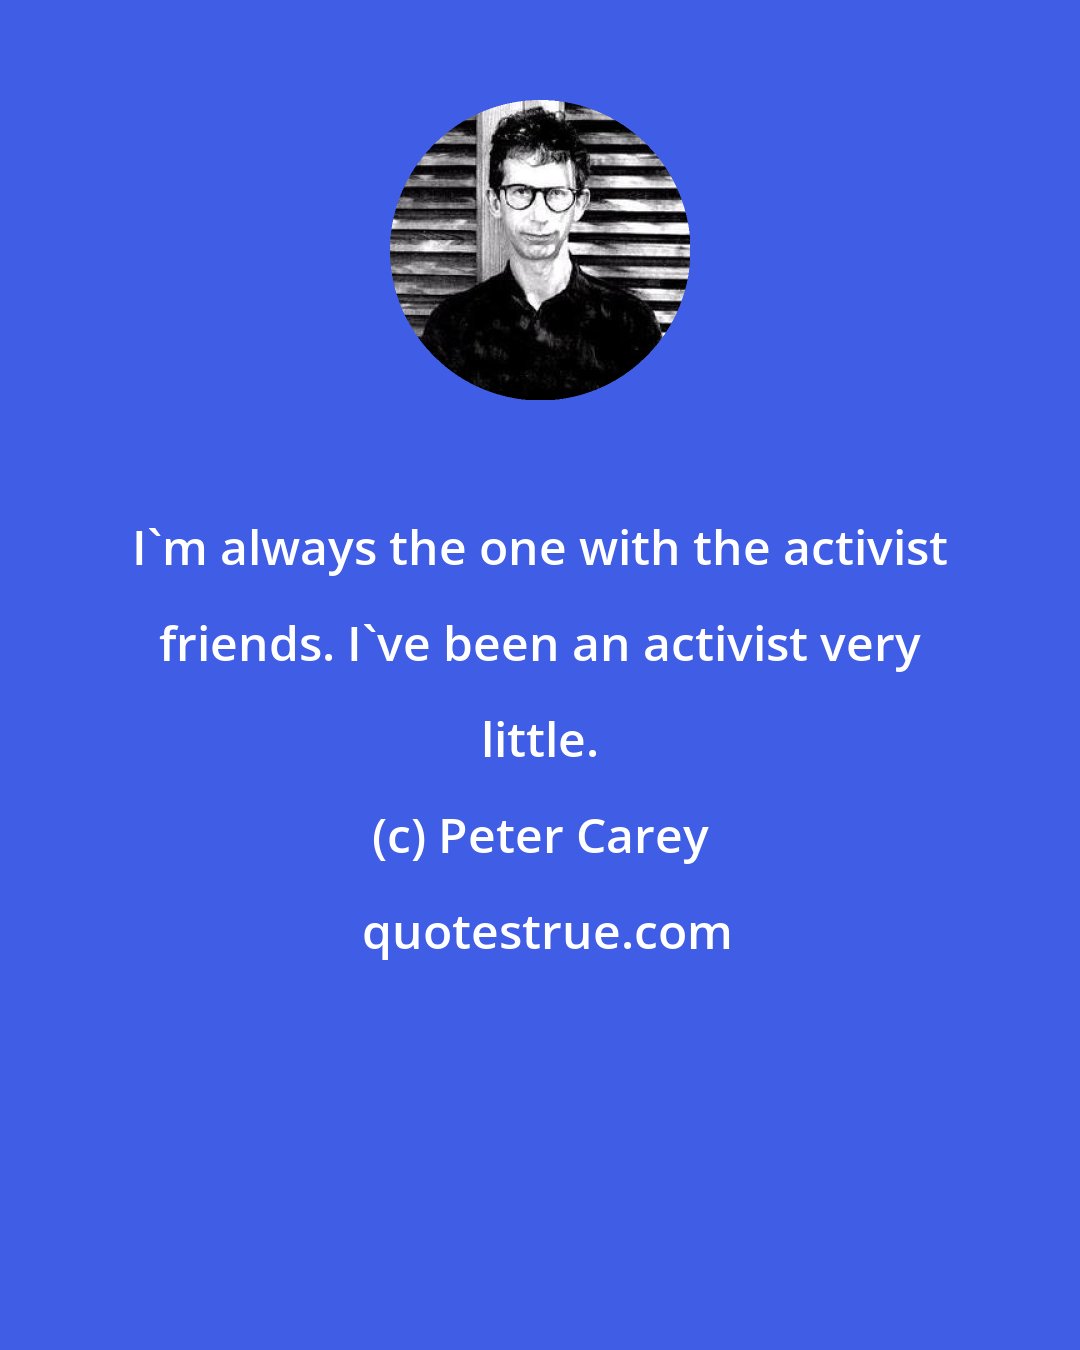 Peter Carey: I'm always the one with the activist friends. I've been an activist very little.